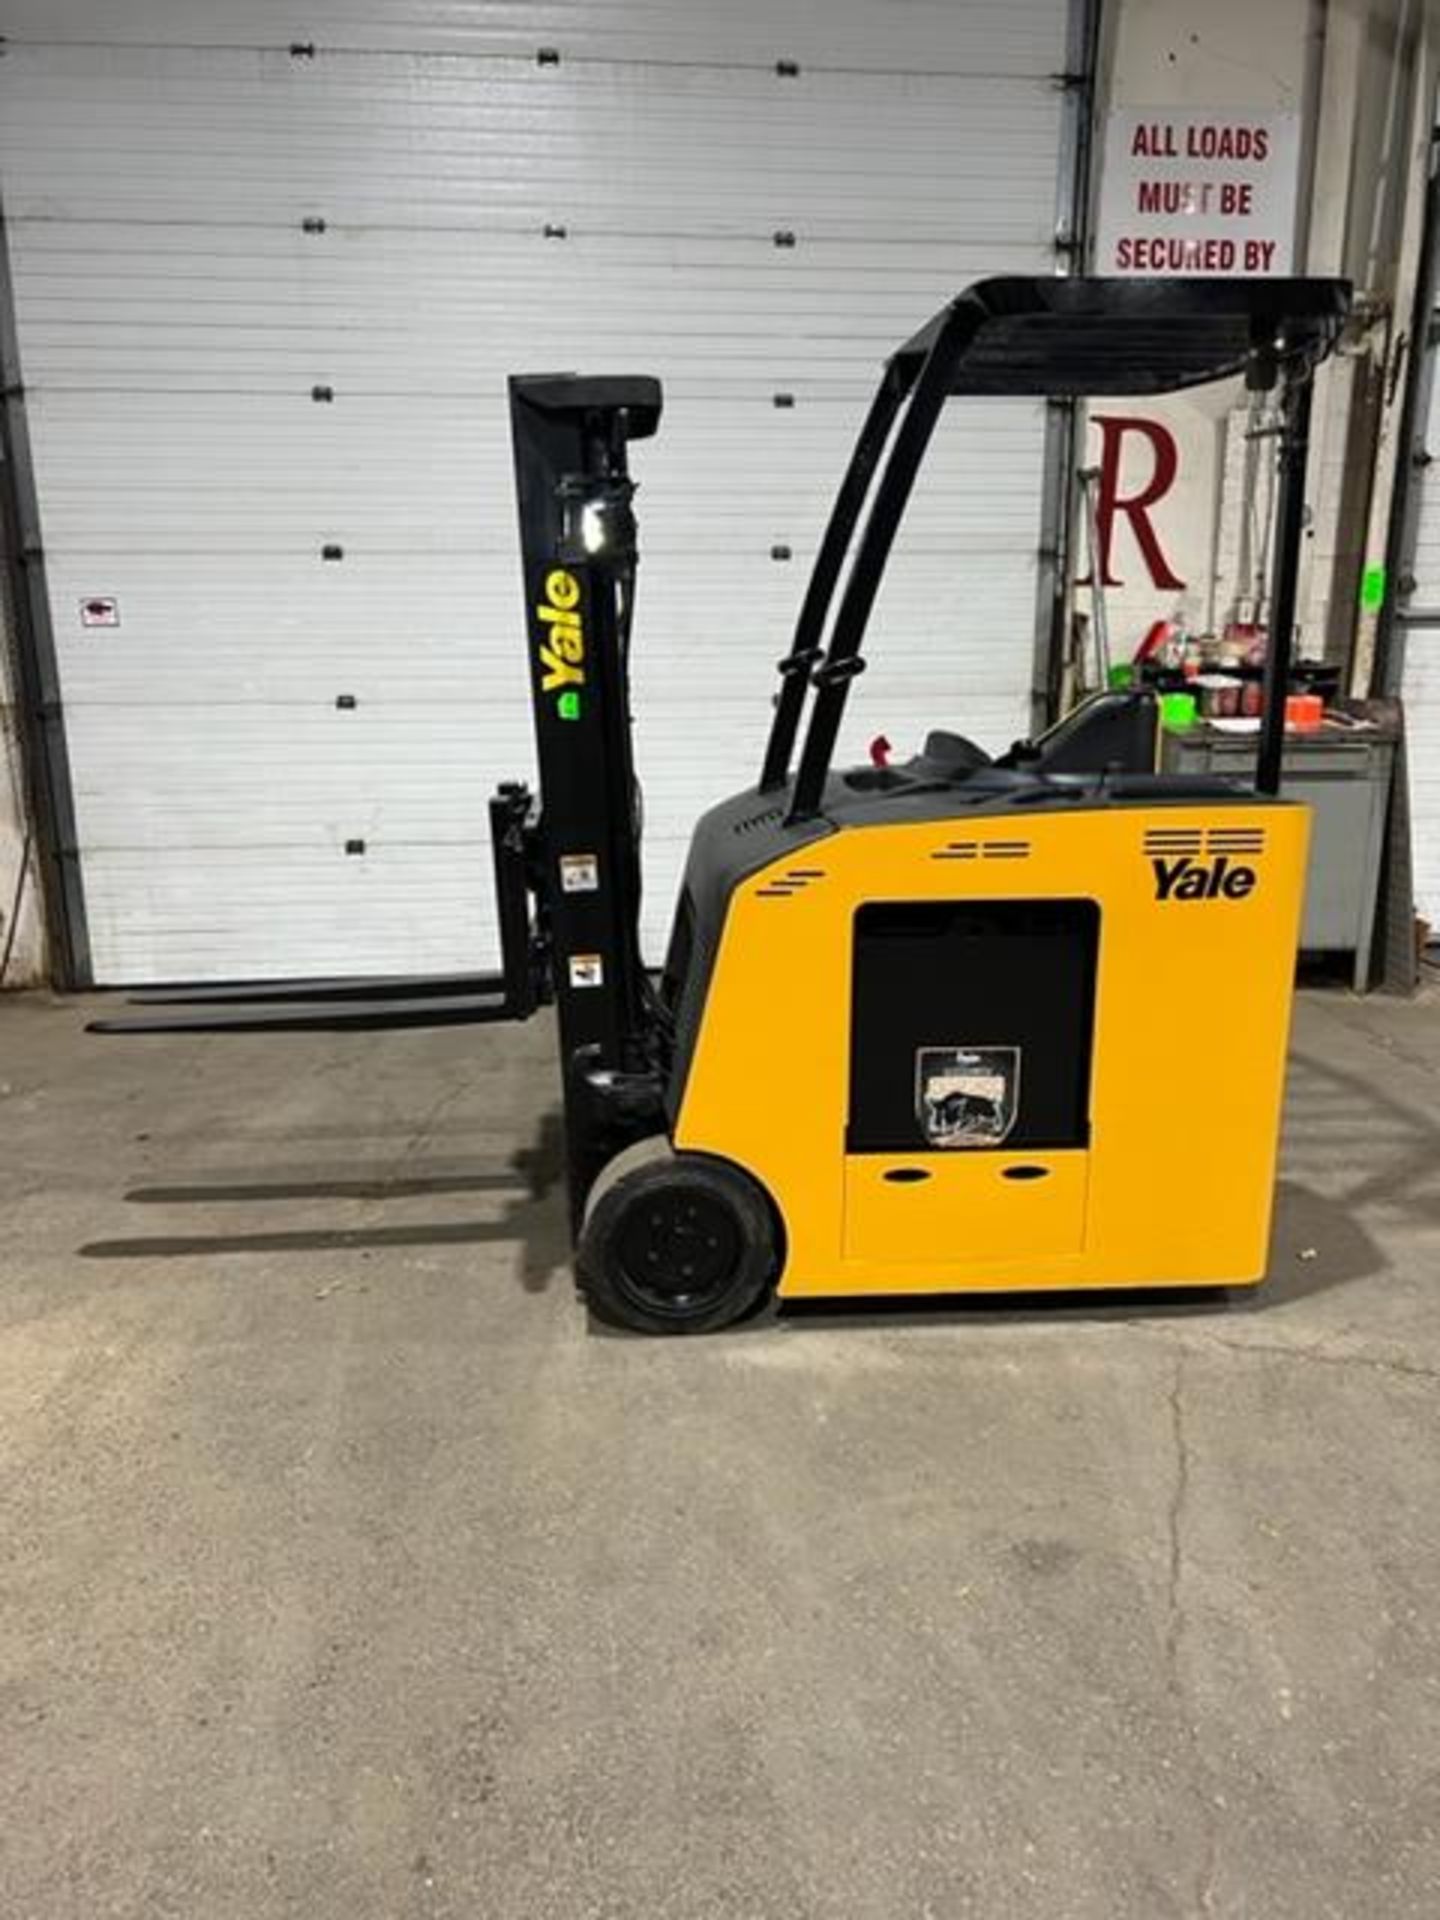 NICE 2011 Yale Stand Up Counterbalance Forklift 4000lbs capacity with 3-stage mast & sideshift